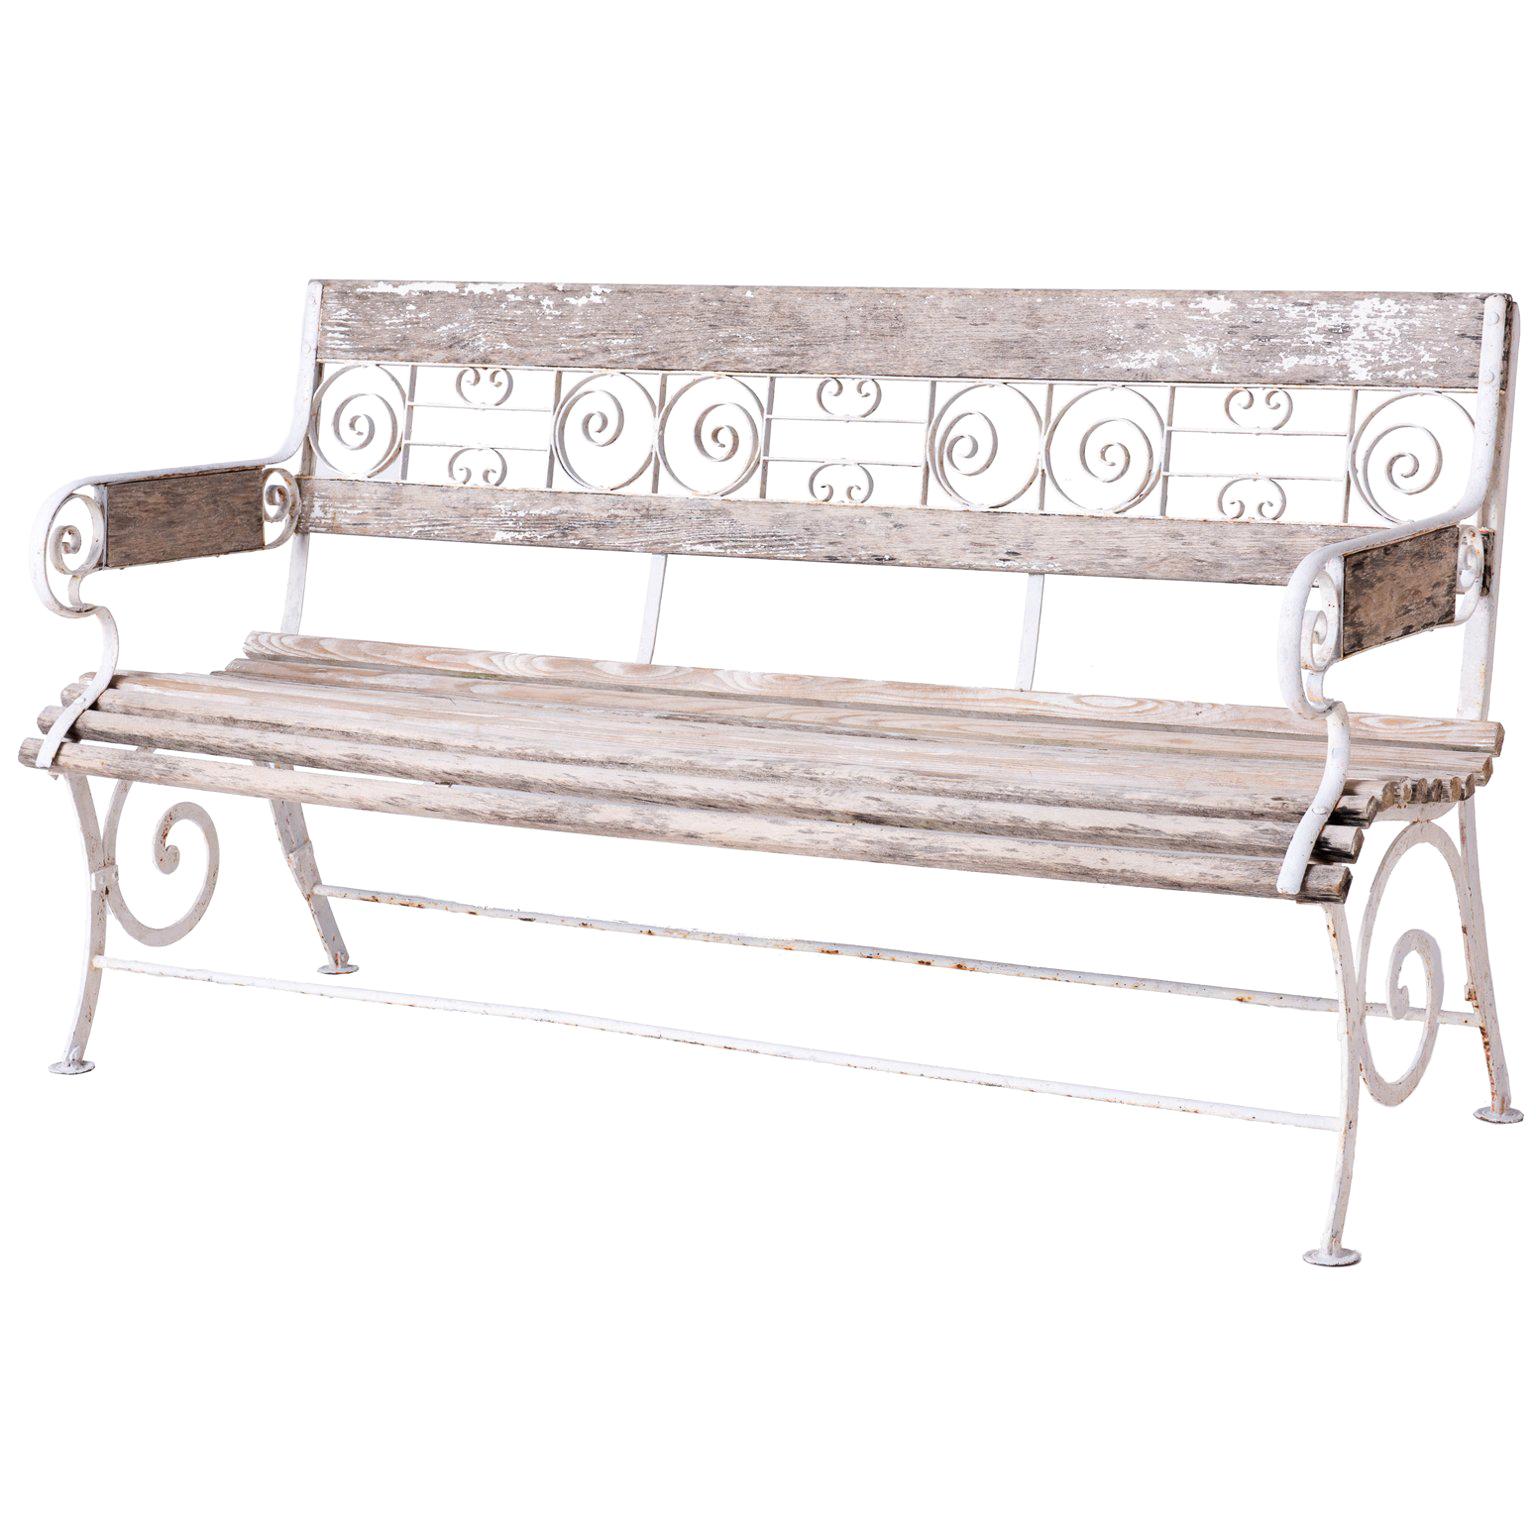 French Wood and Wrought Iron Garden Bench, circa 1900